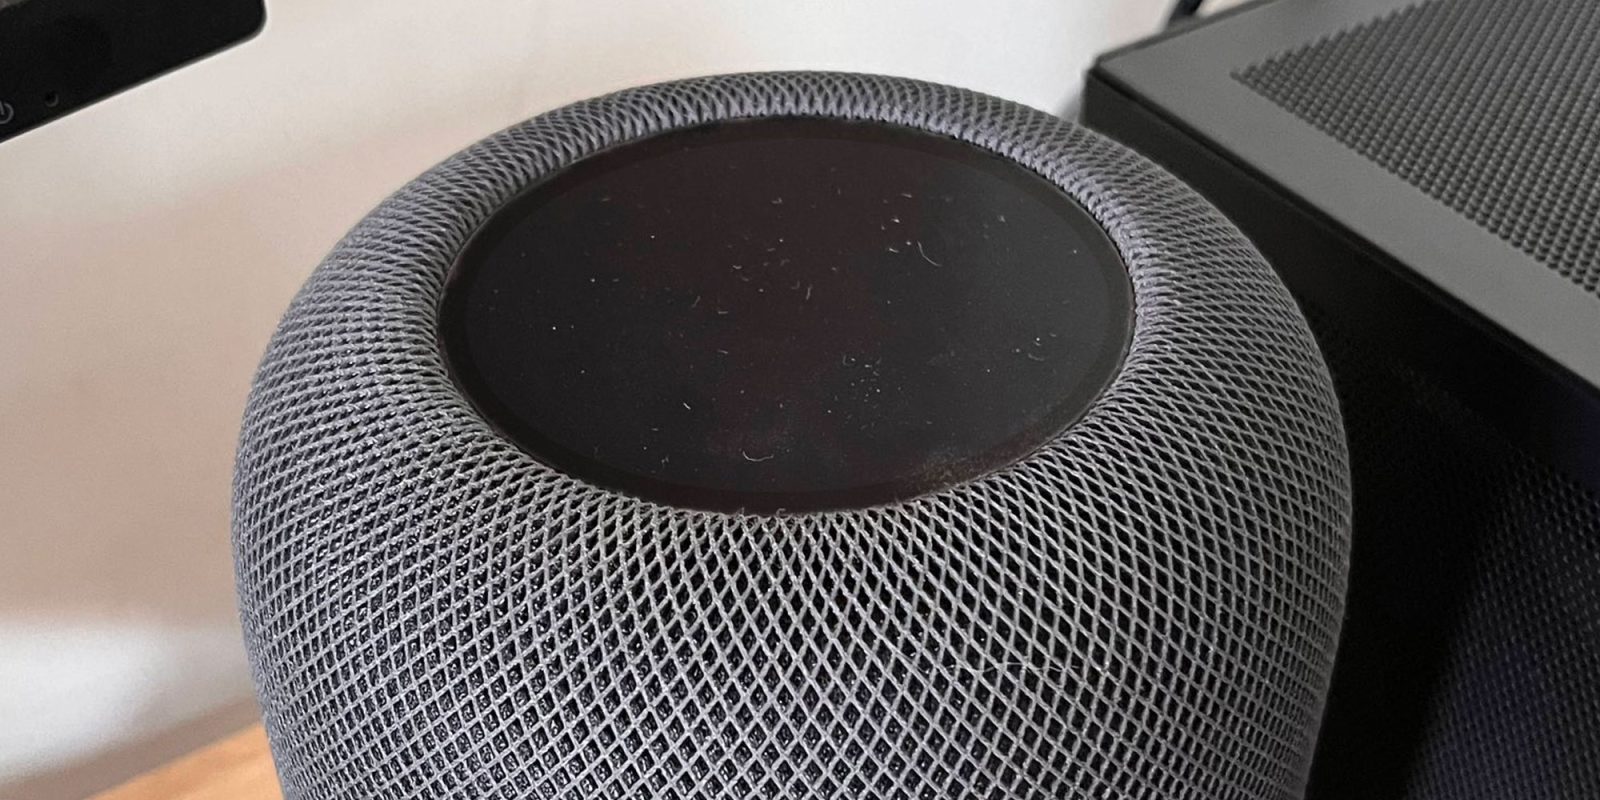 HomePod prototype with touchscreen LCD on top shows up in new images